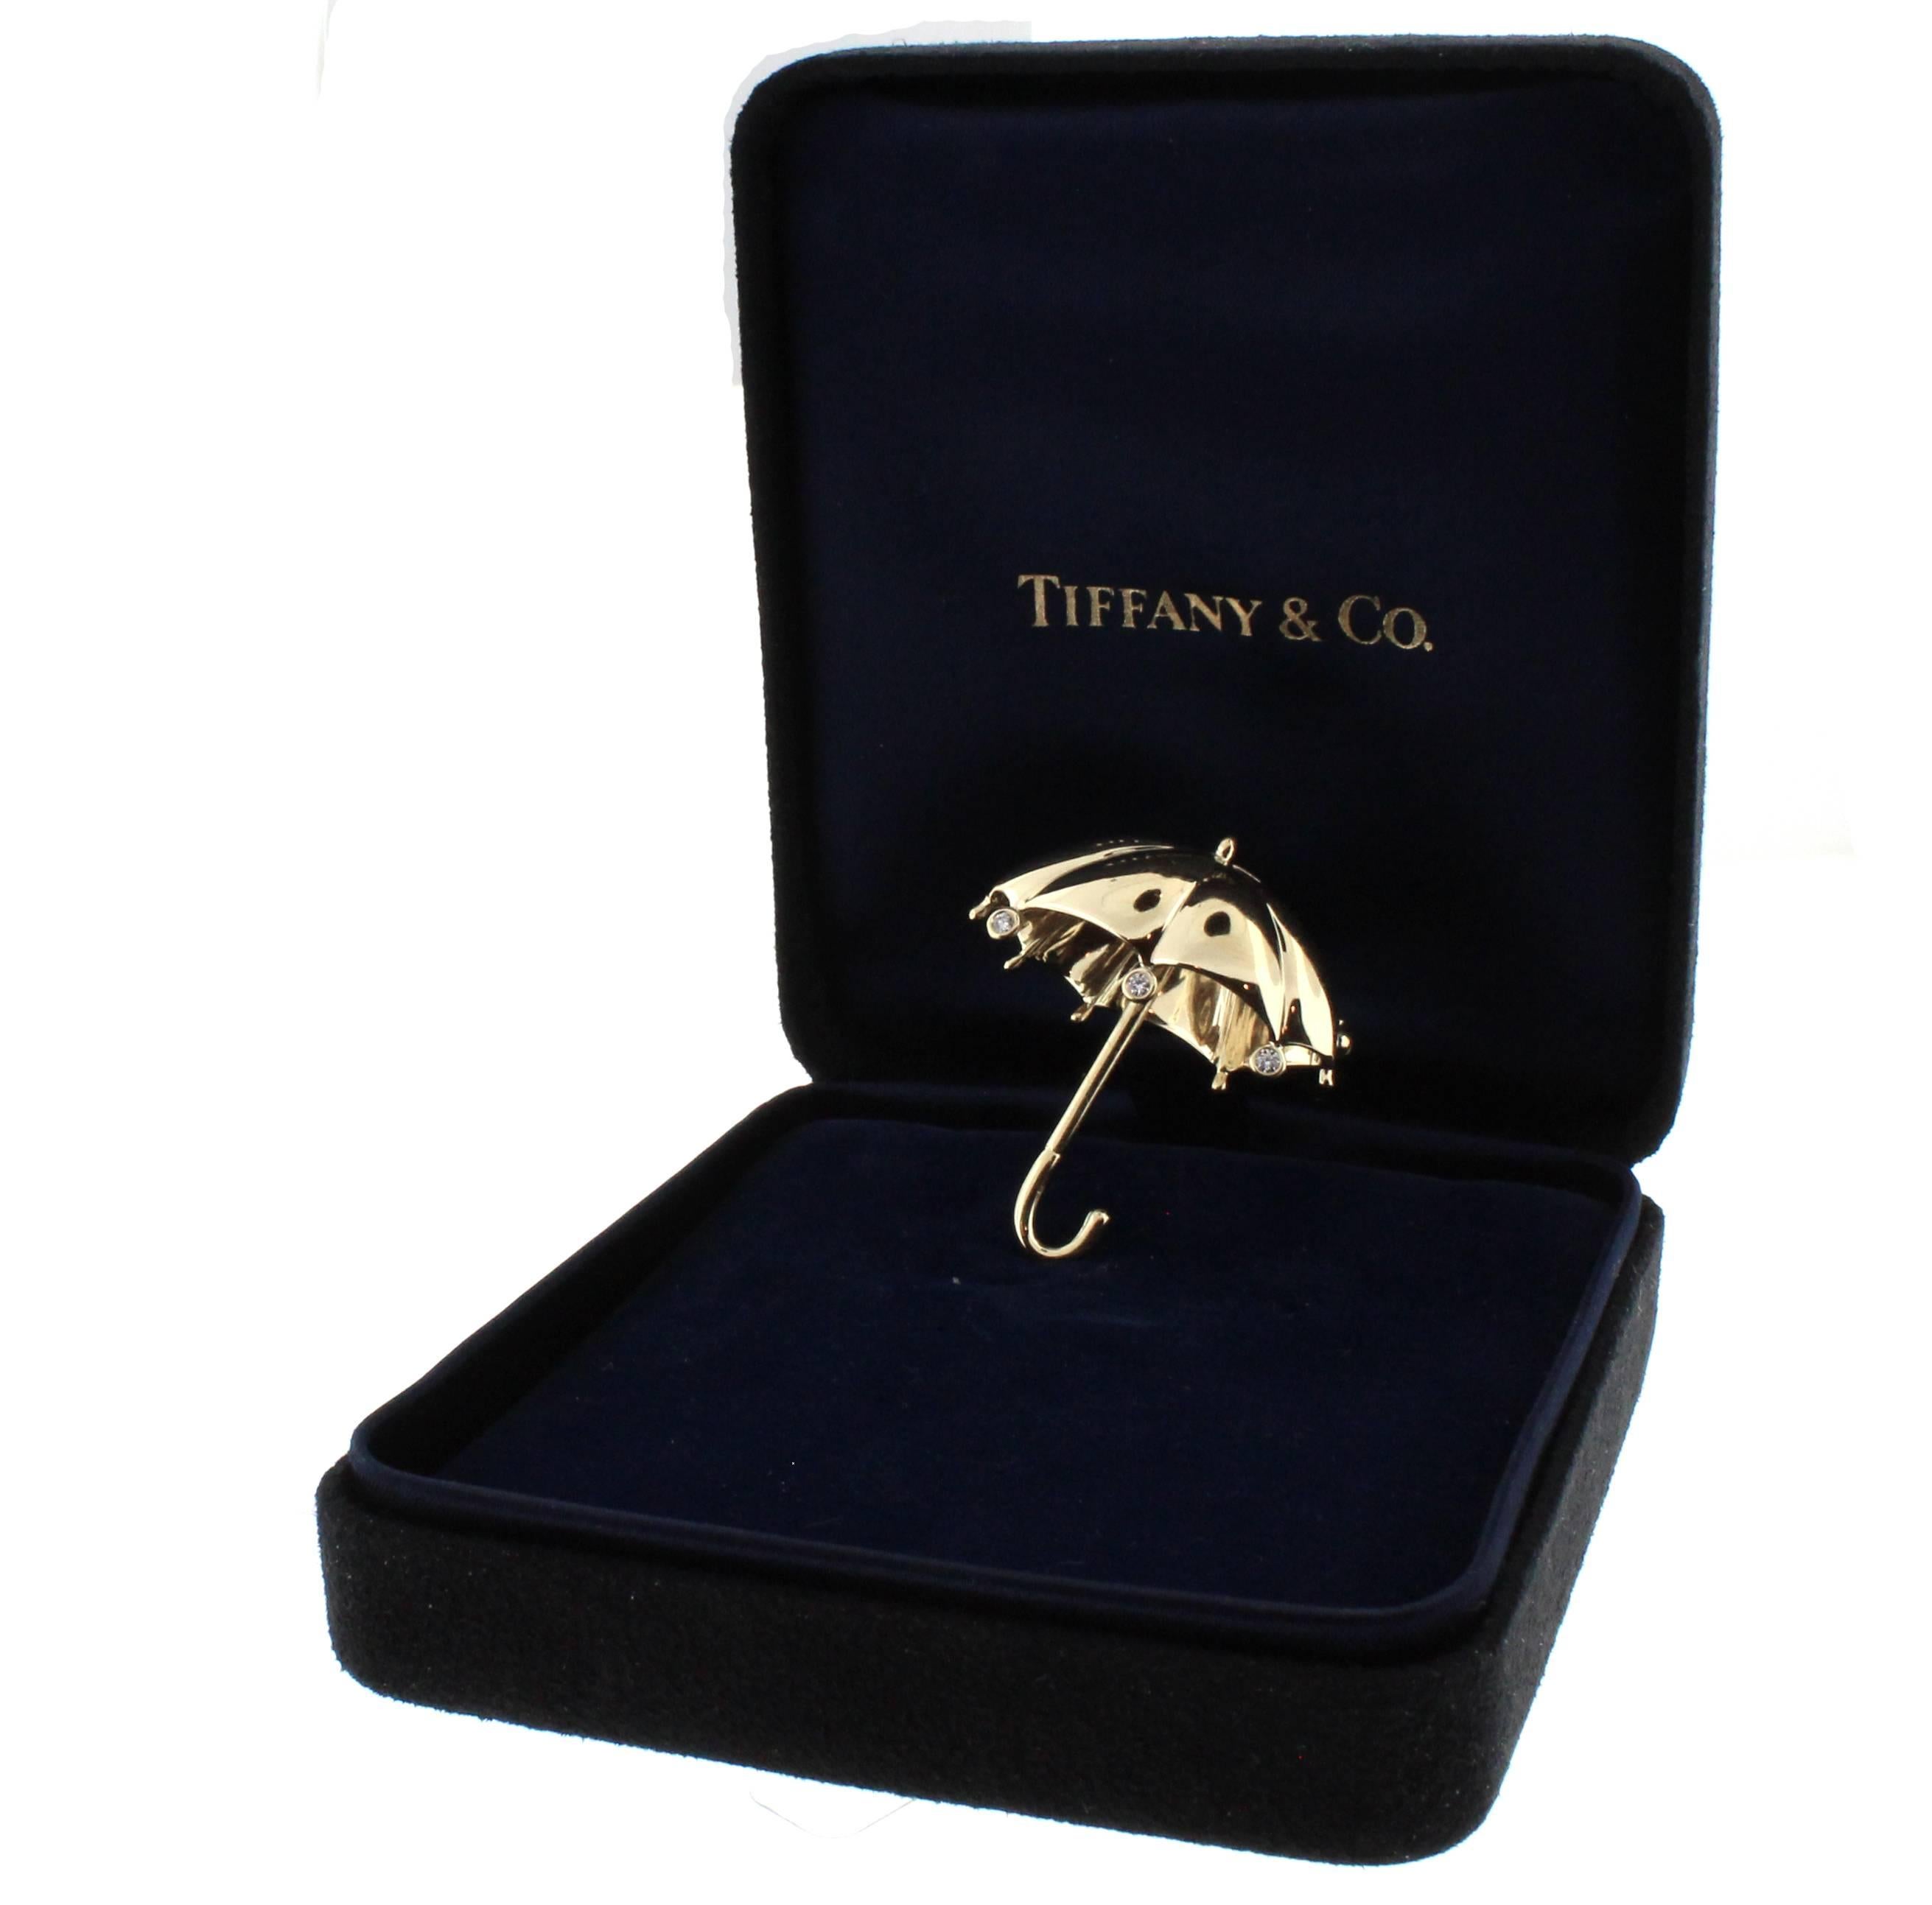 A whimsical umbrella brooch from Tiffany and Co. Set with three diamond rain drops this is the perfect accessory for a rainy day. This 18 karat brooch is in exceptional condition with no scratches or any signs of wear in it's original box.